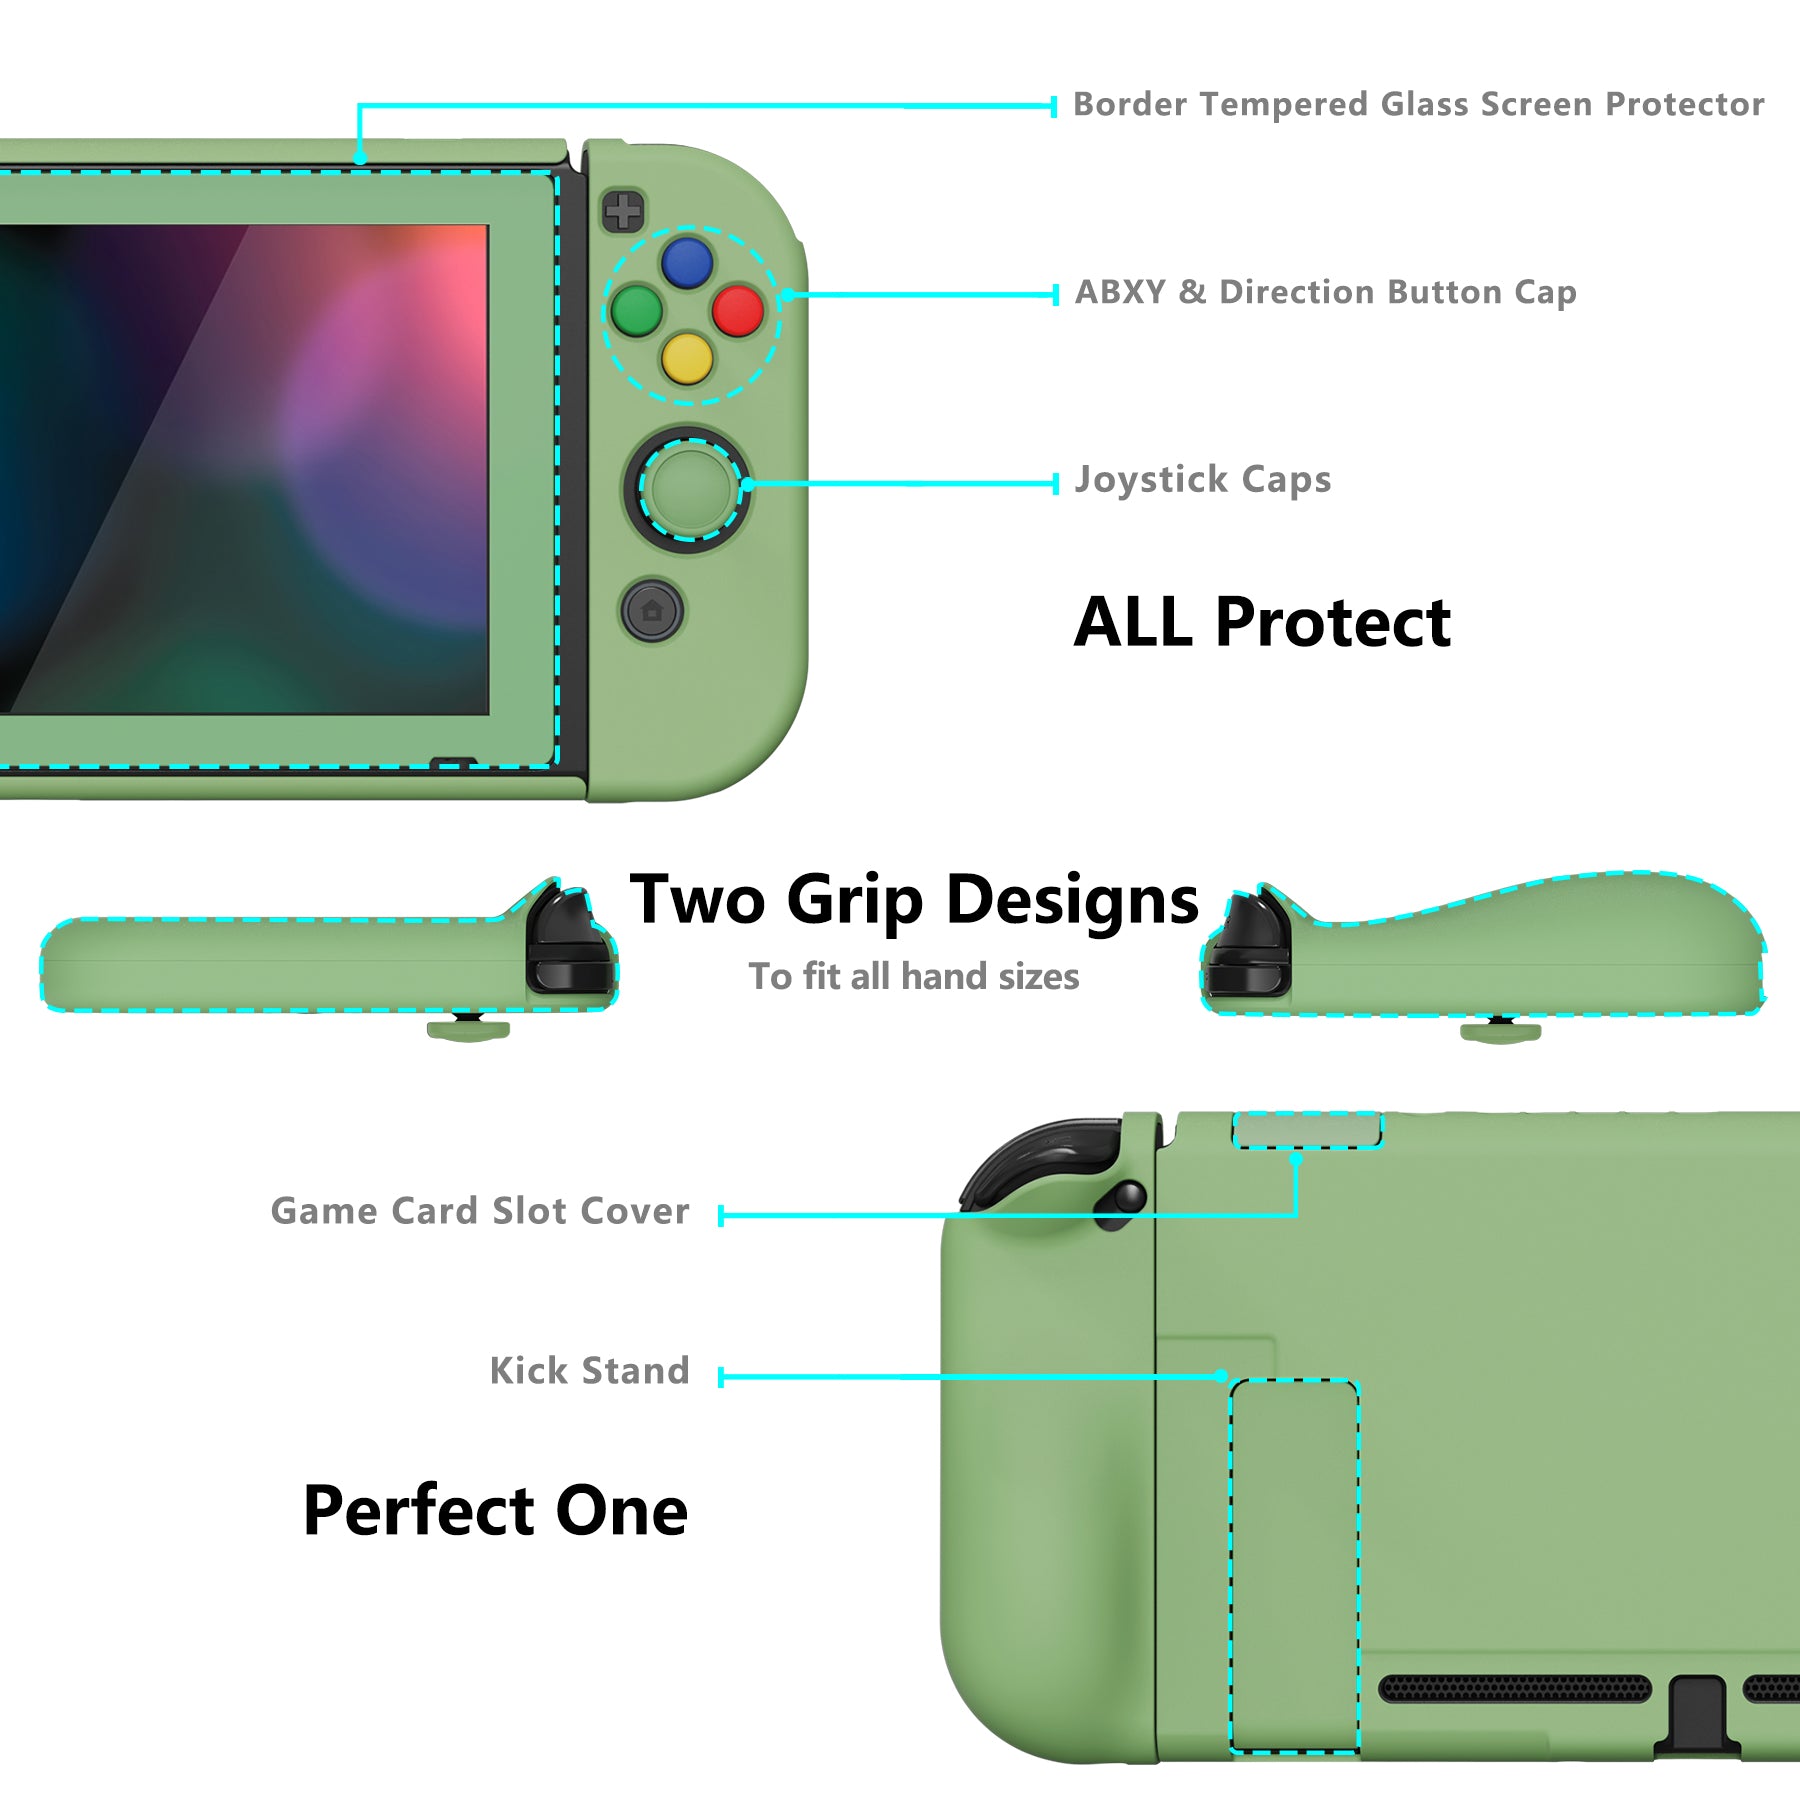 PlayVital AlterGrips Dockable Protective Case Ergonomic Grip Cover for Nintendo Switch, Interchangeable Cover w/Screen Protector & Thumb Grip Caps & Button Caps - Matcha Green - TNSYP3005